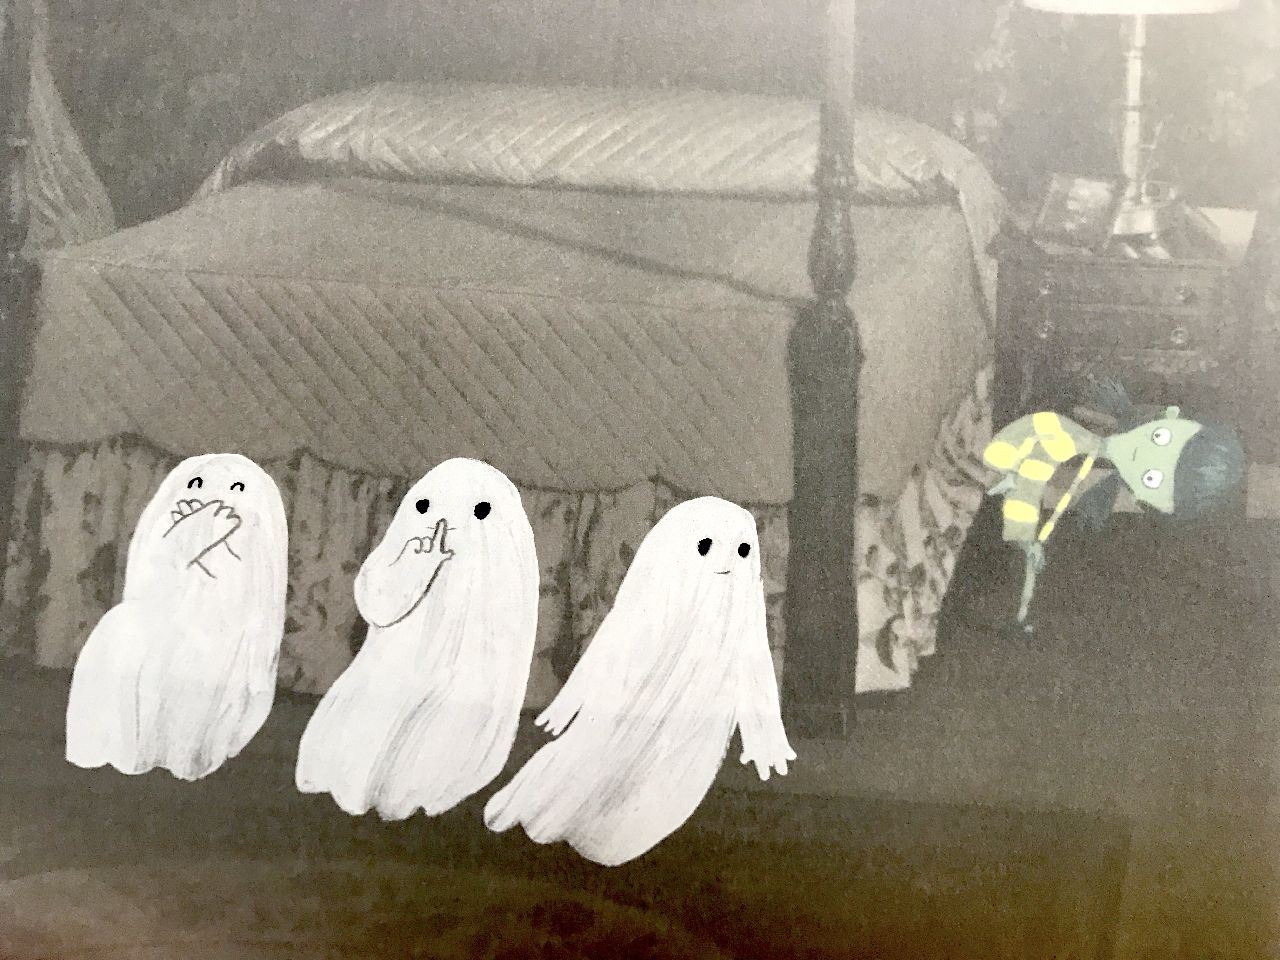 Oliver Jeffers, There's a ghost in this house, HarperCollins